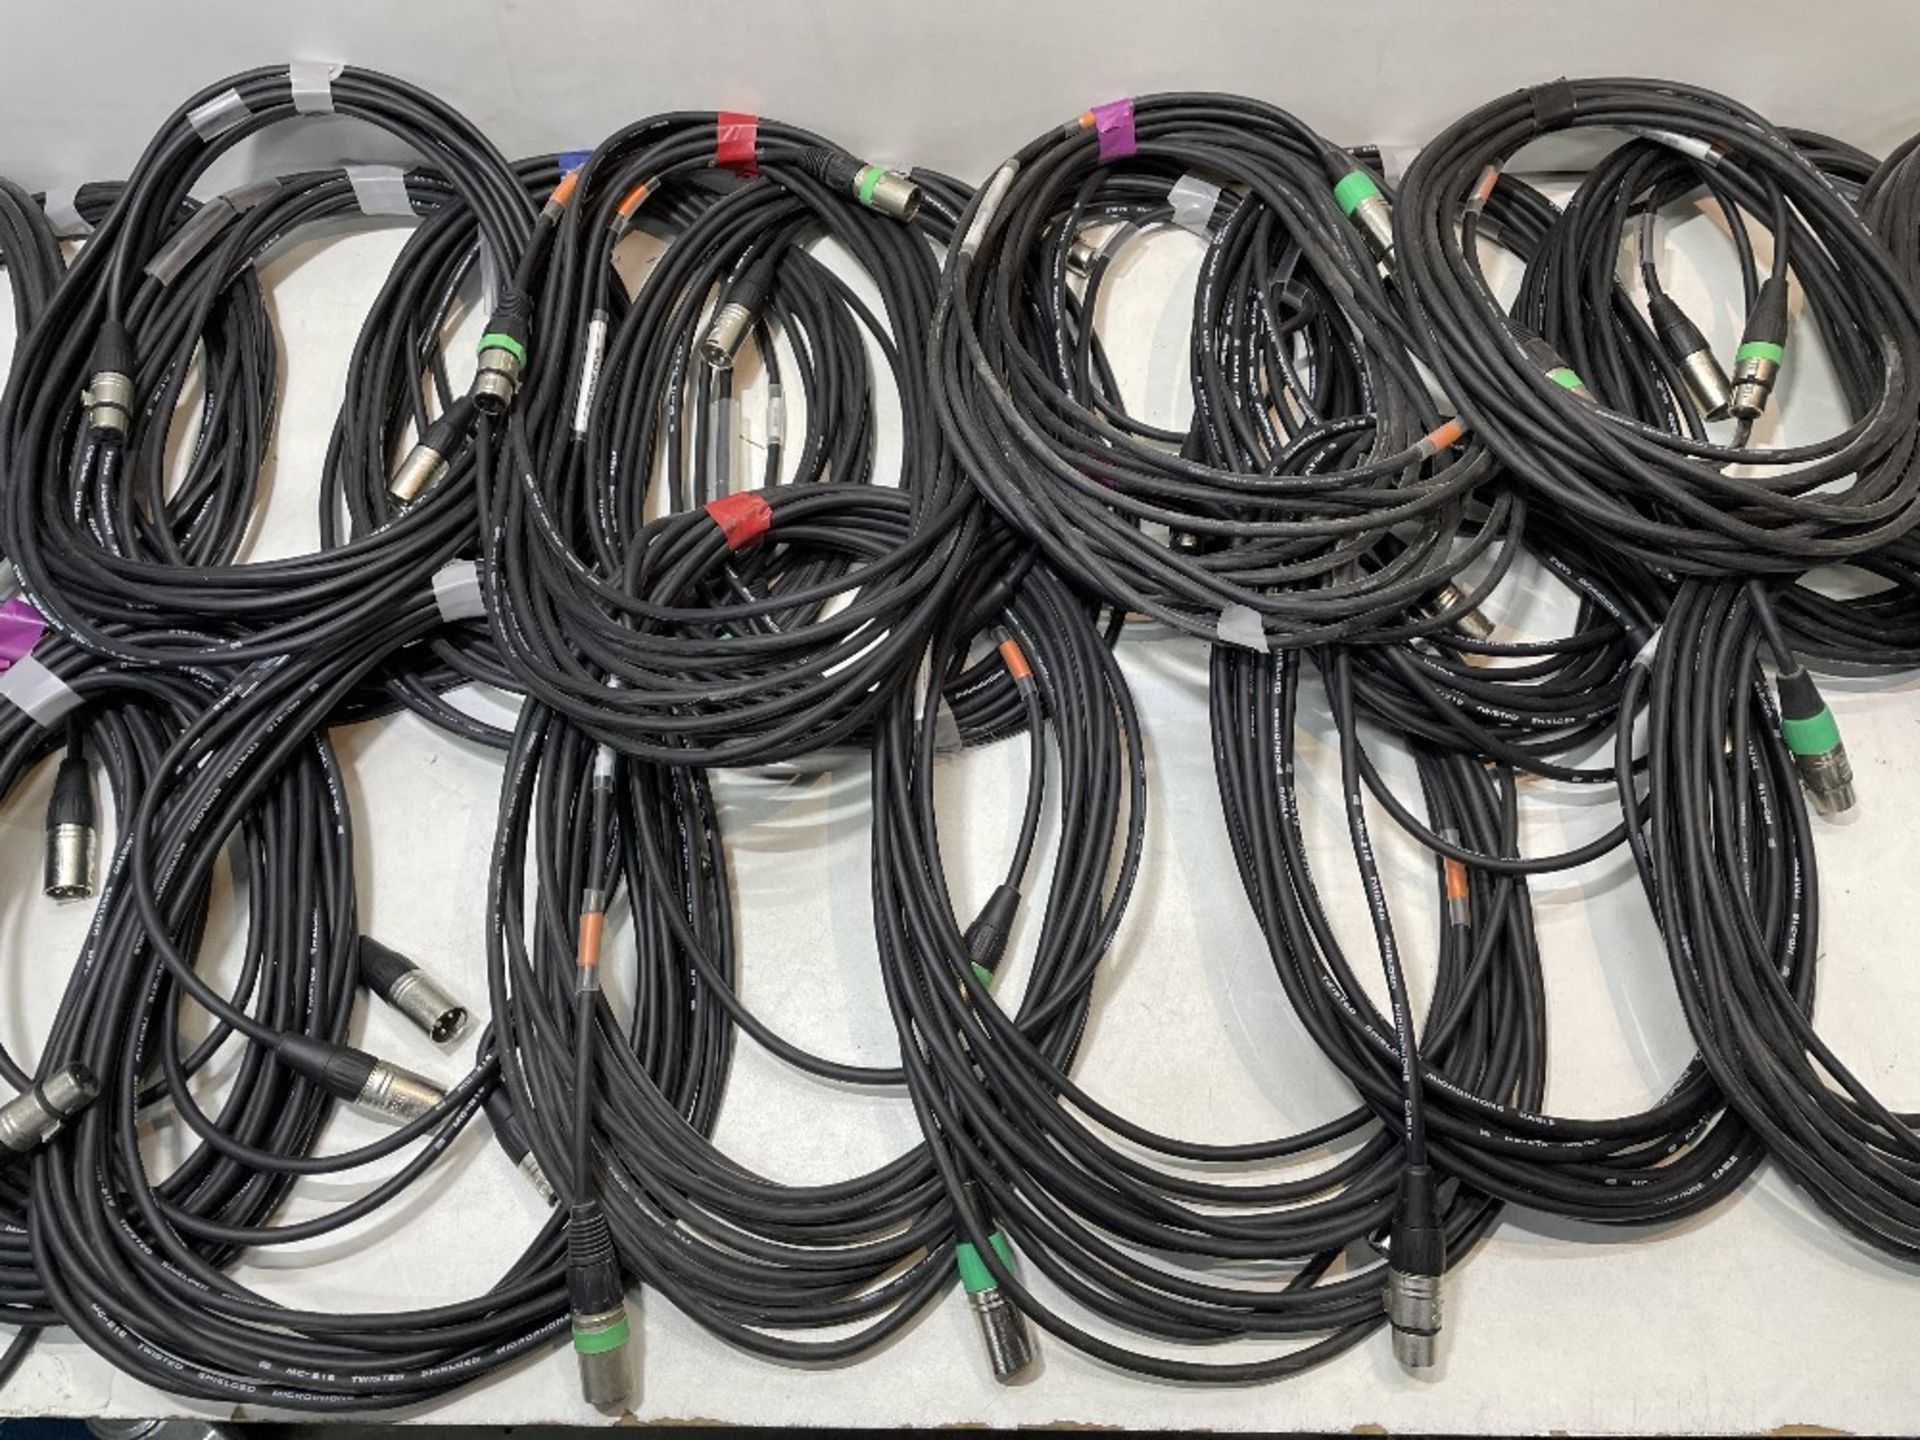 24 x Approx 10m DMX Cables - Image 2 of 5